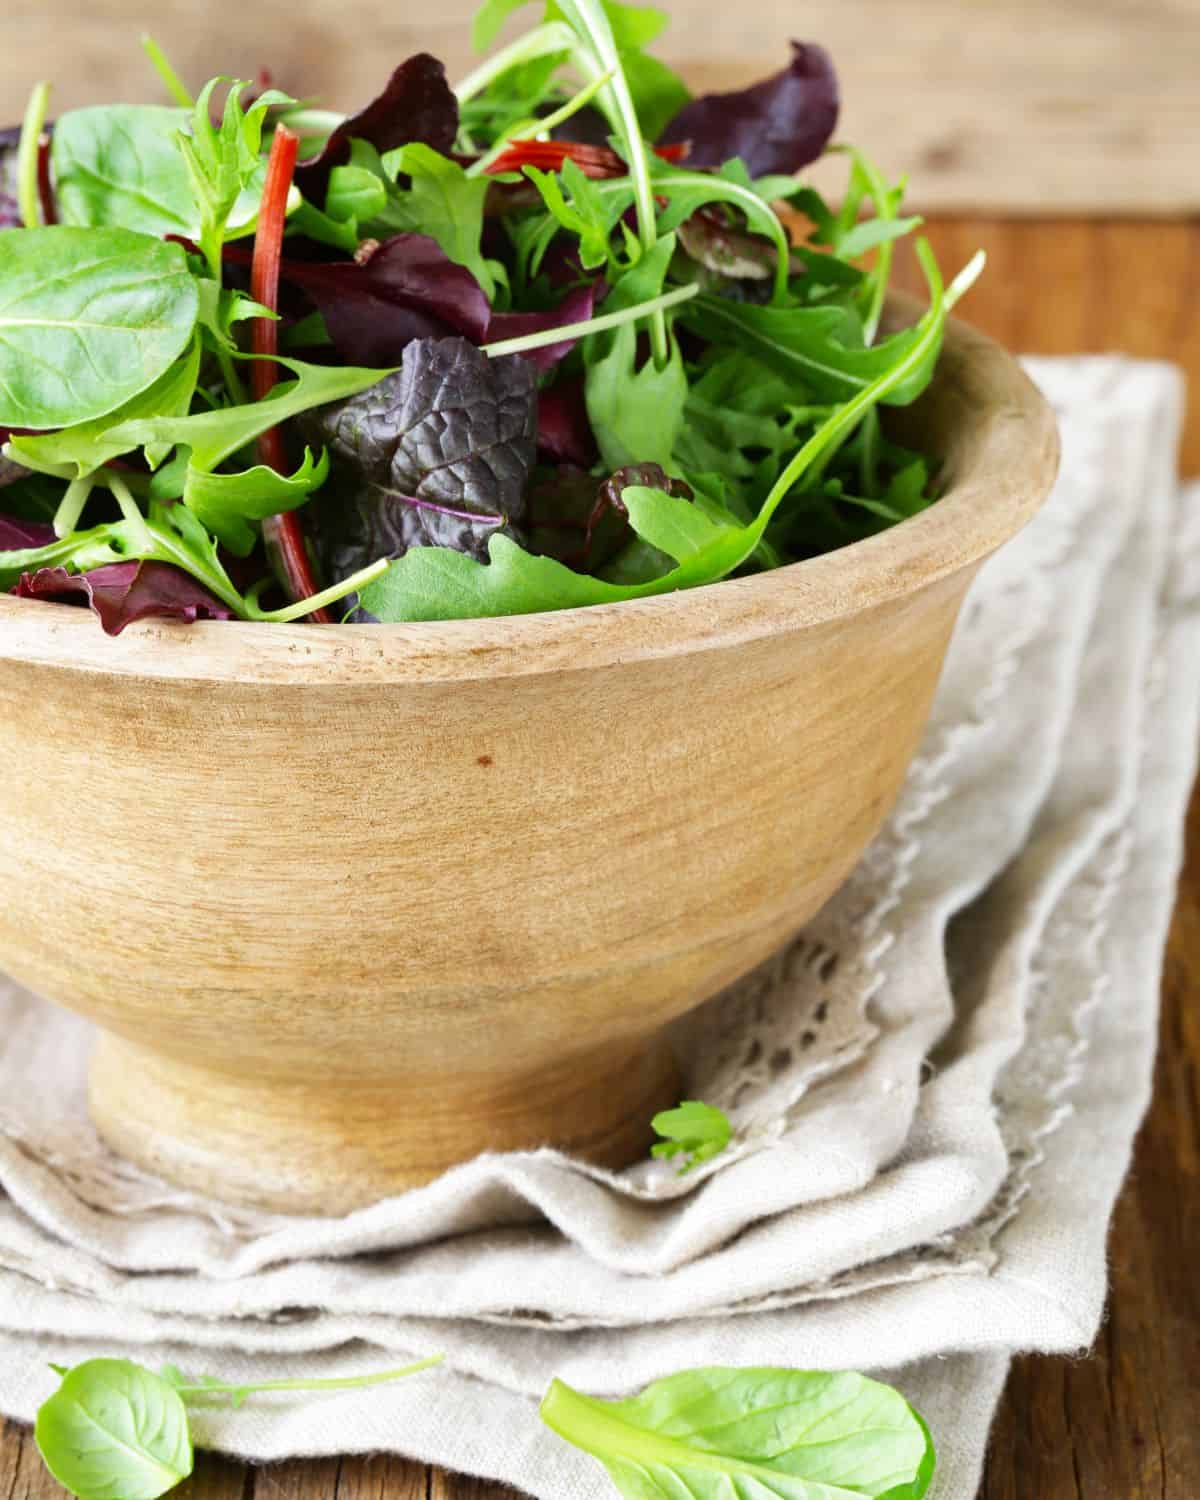 Wooden bowl of mixed greens on a cloth napkin.